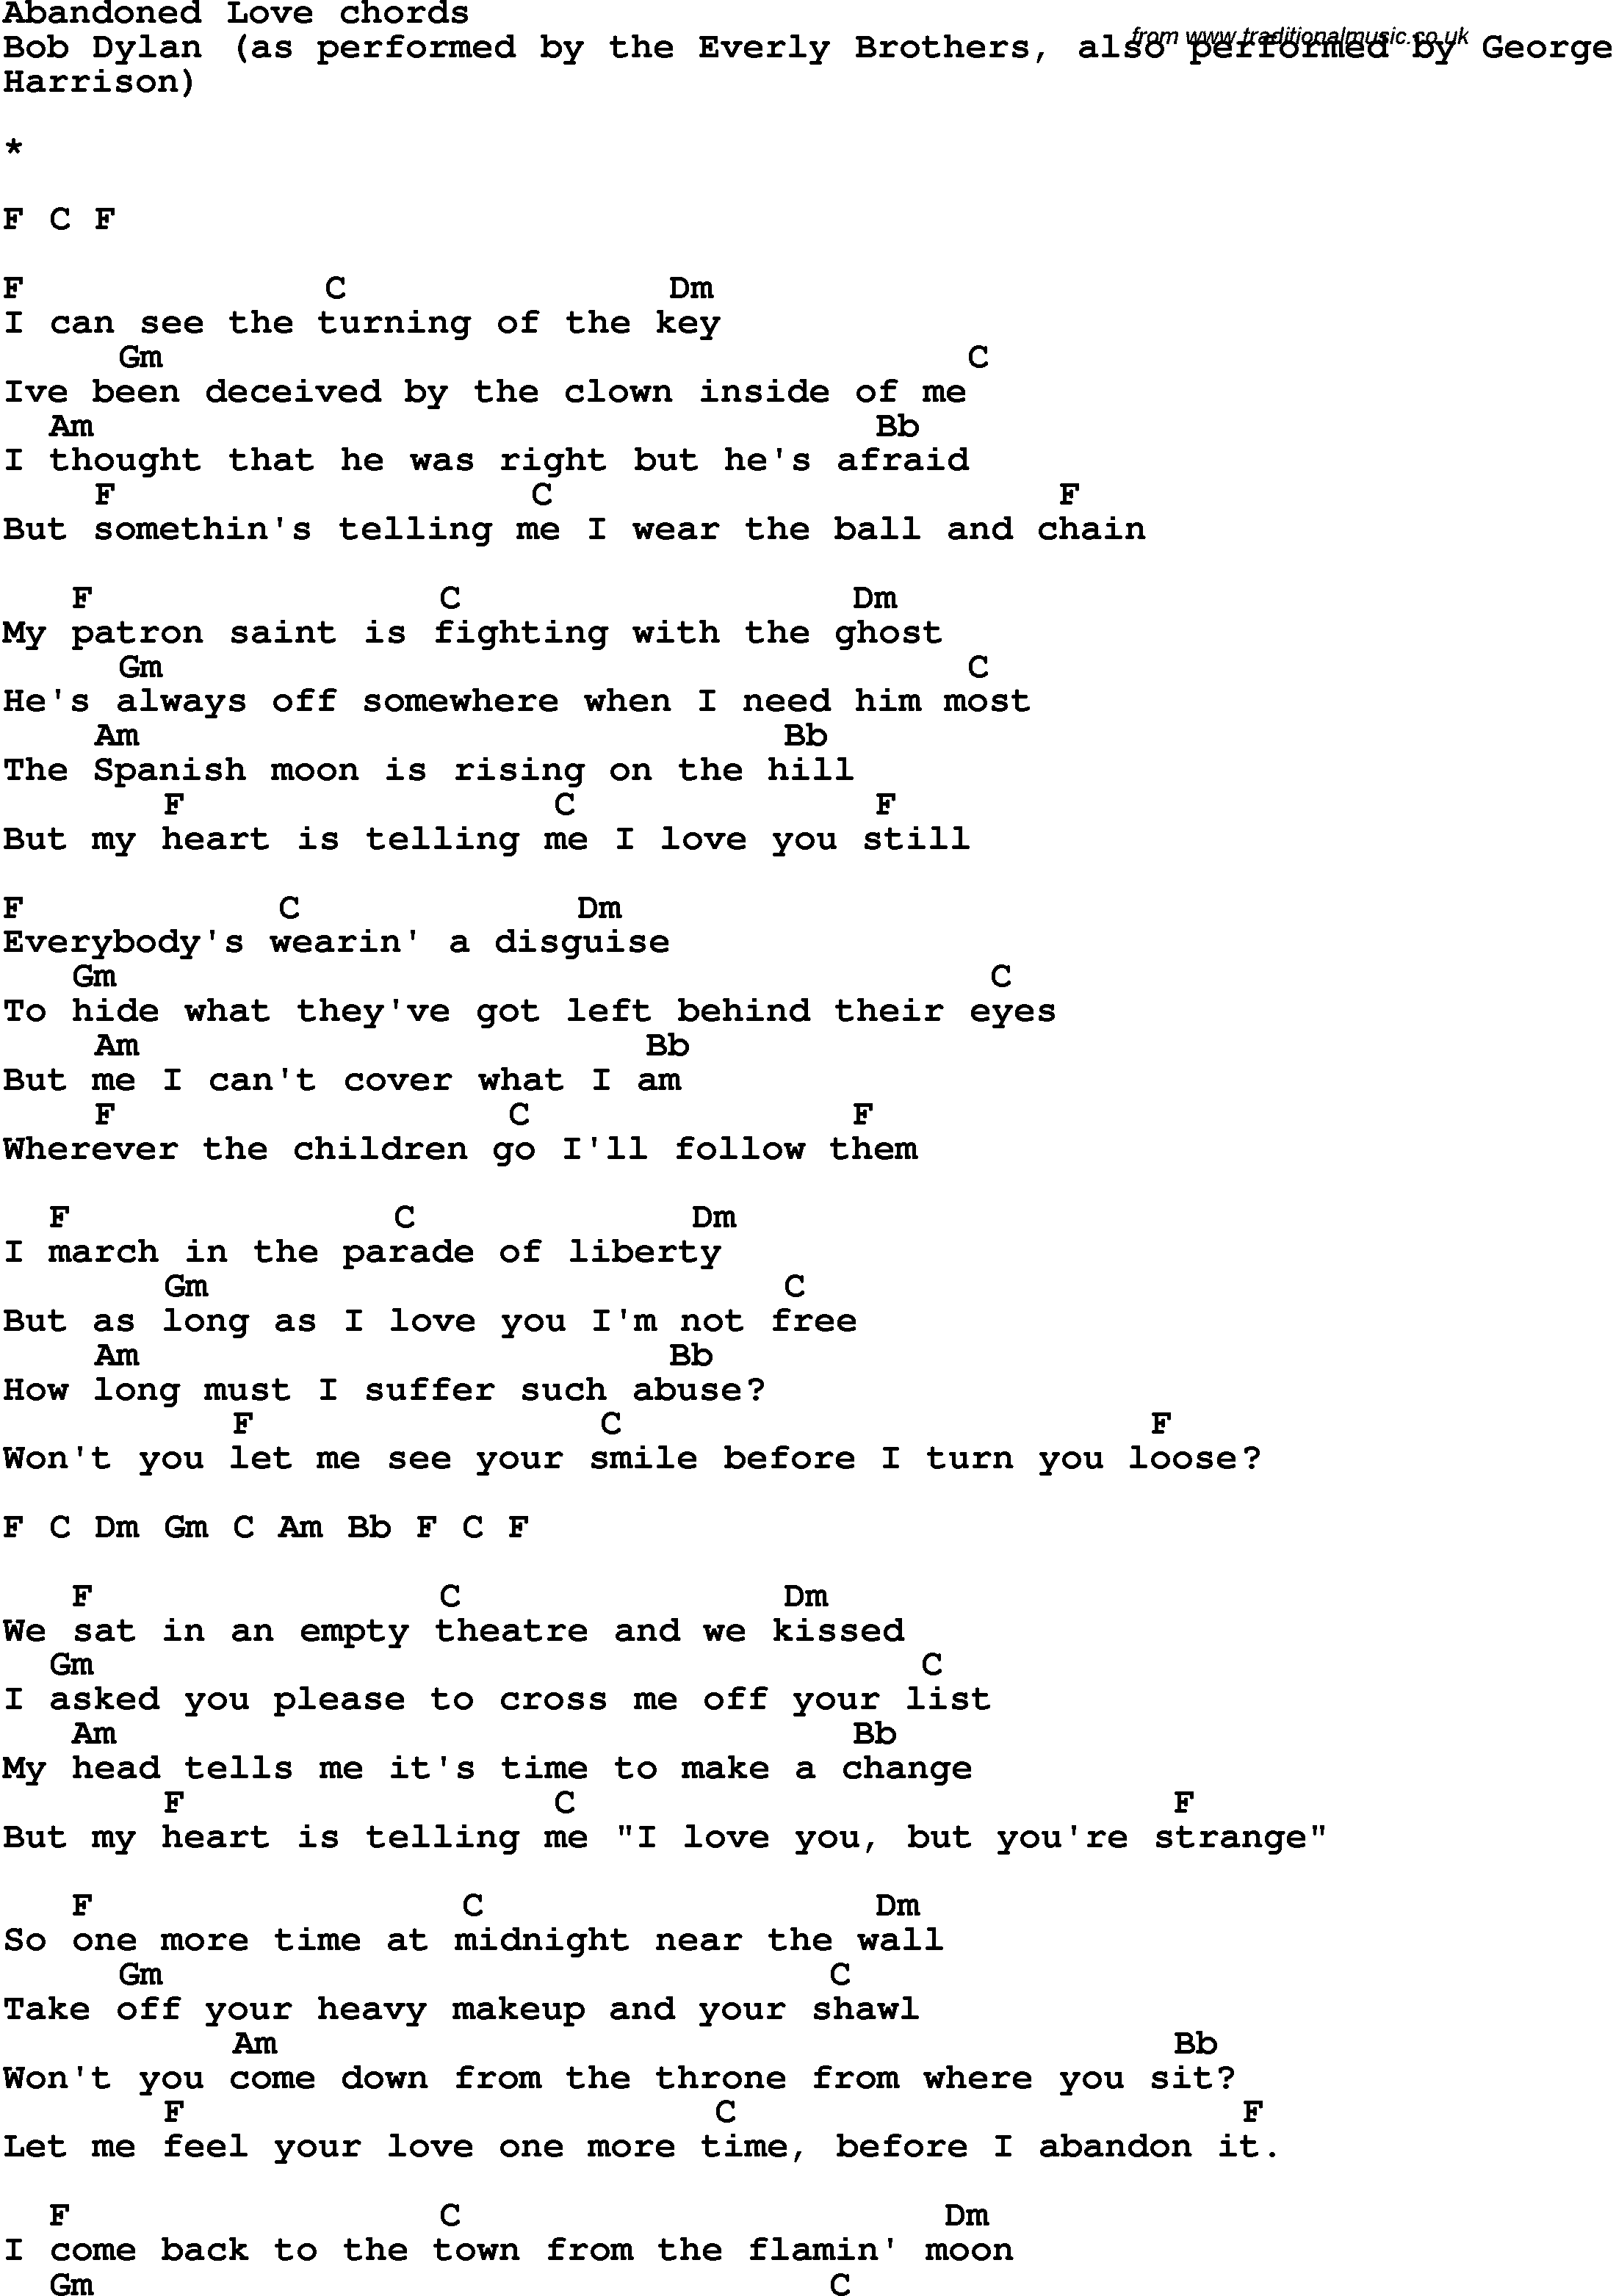 Song Lyrics with guitar chords for Abandoned Love